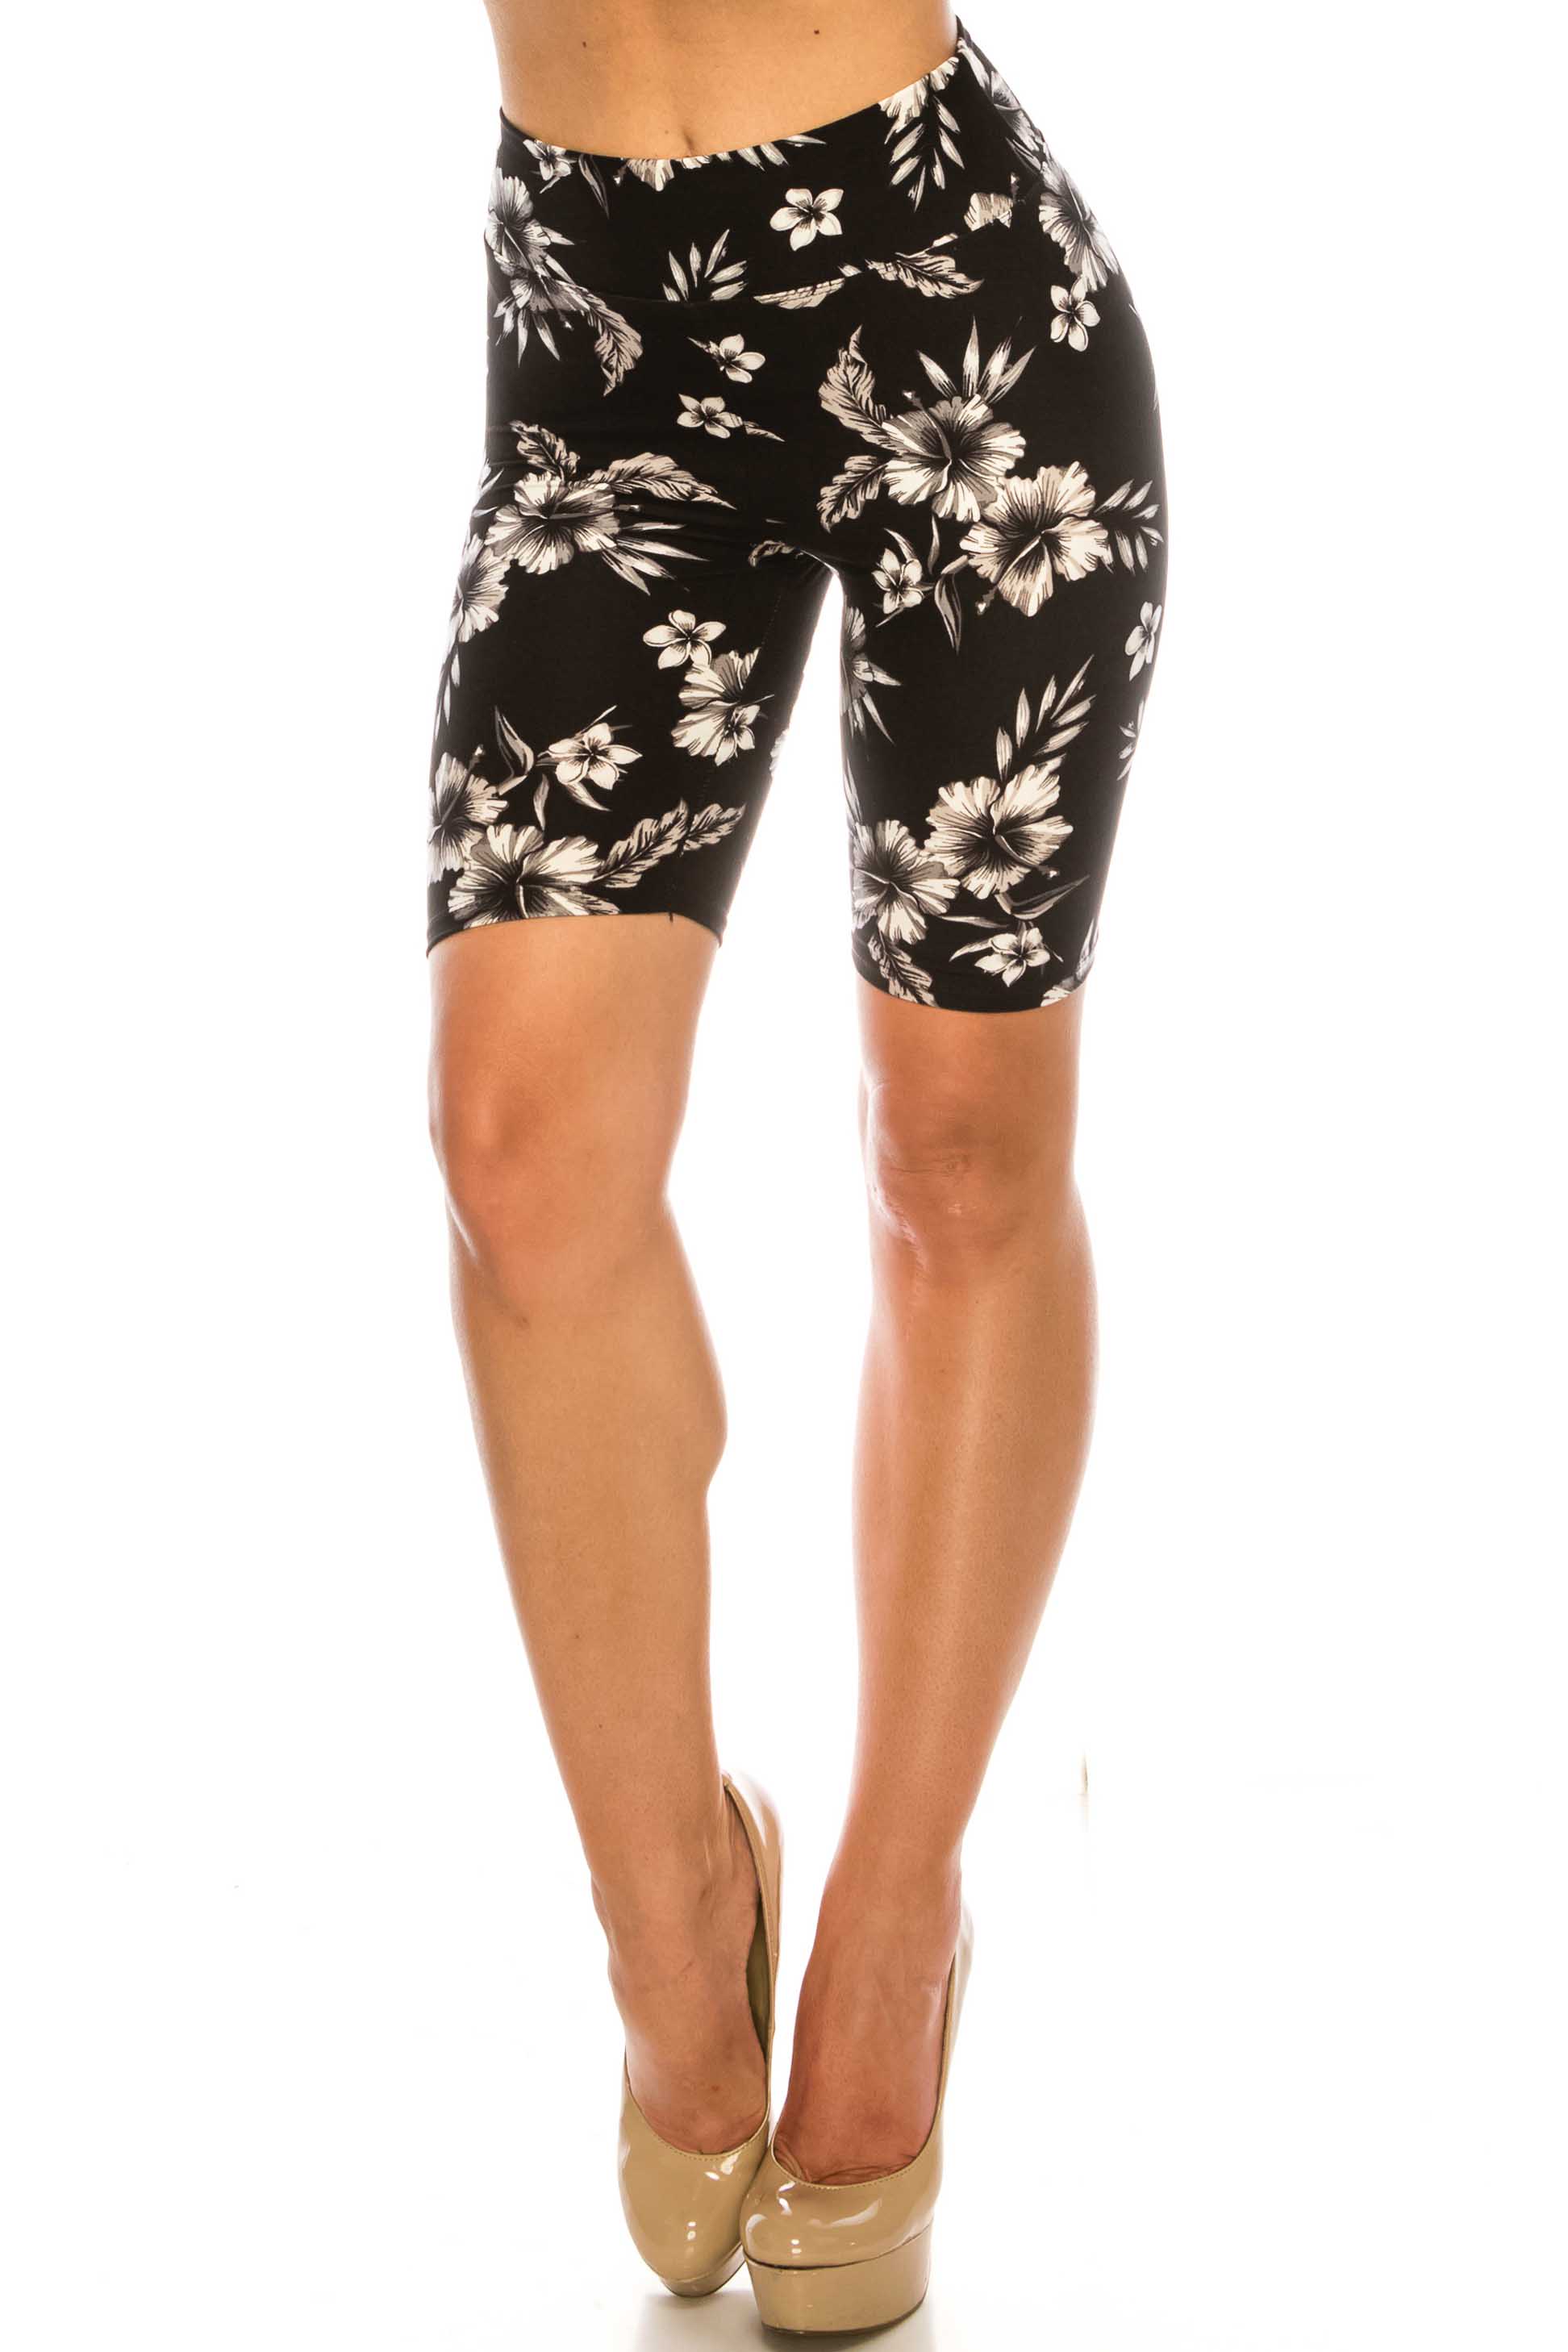 Wholesale Buttery Smooth Monochrome Floral Biker Shorts - 3 Inch Waist Band